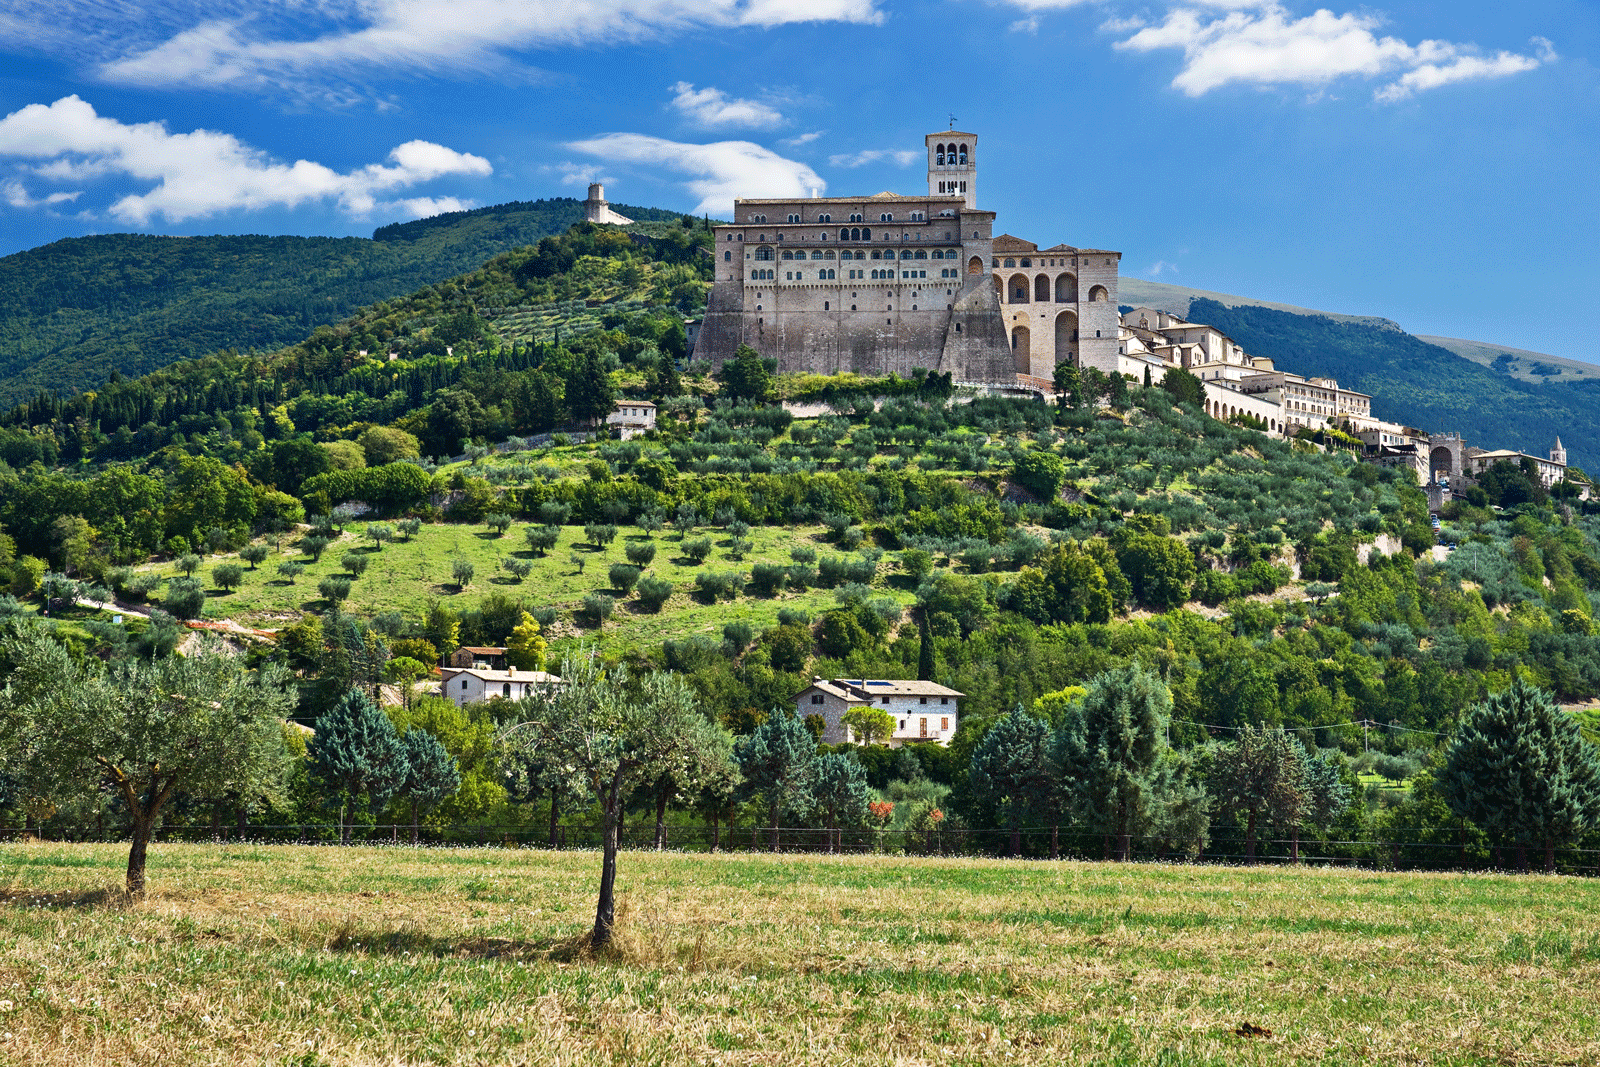 View of the double church of San Francesco, Assisi